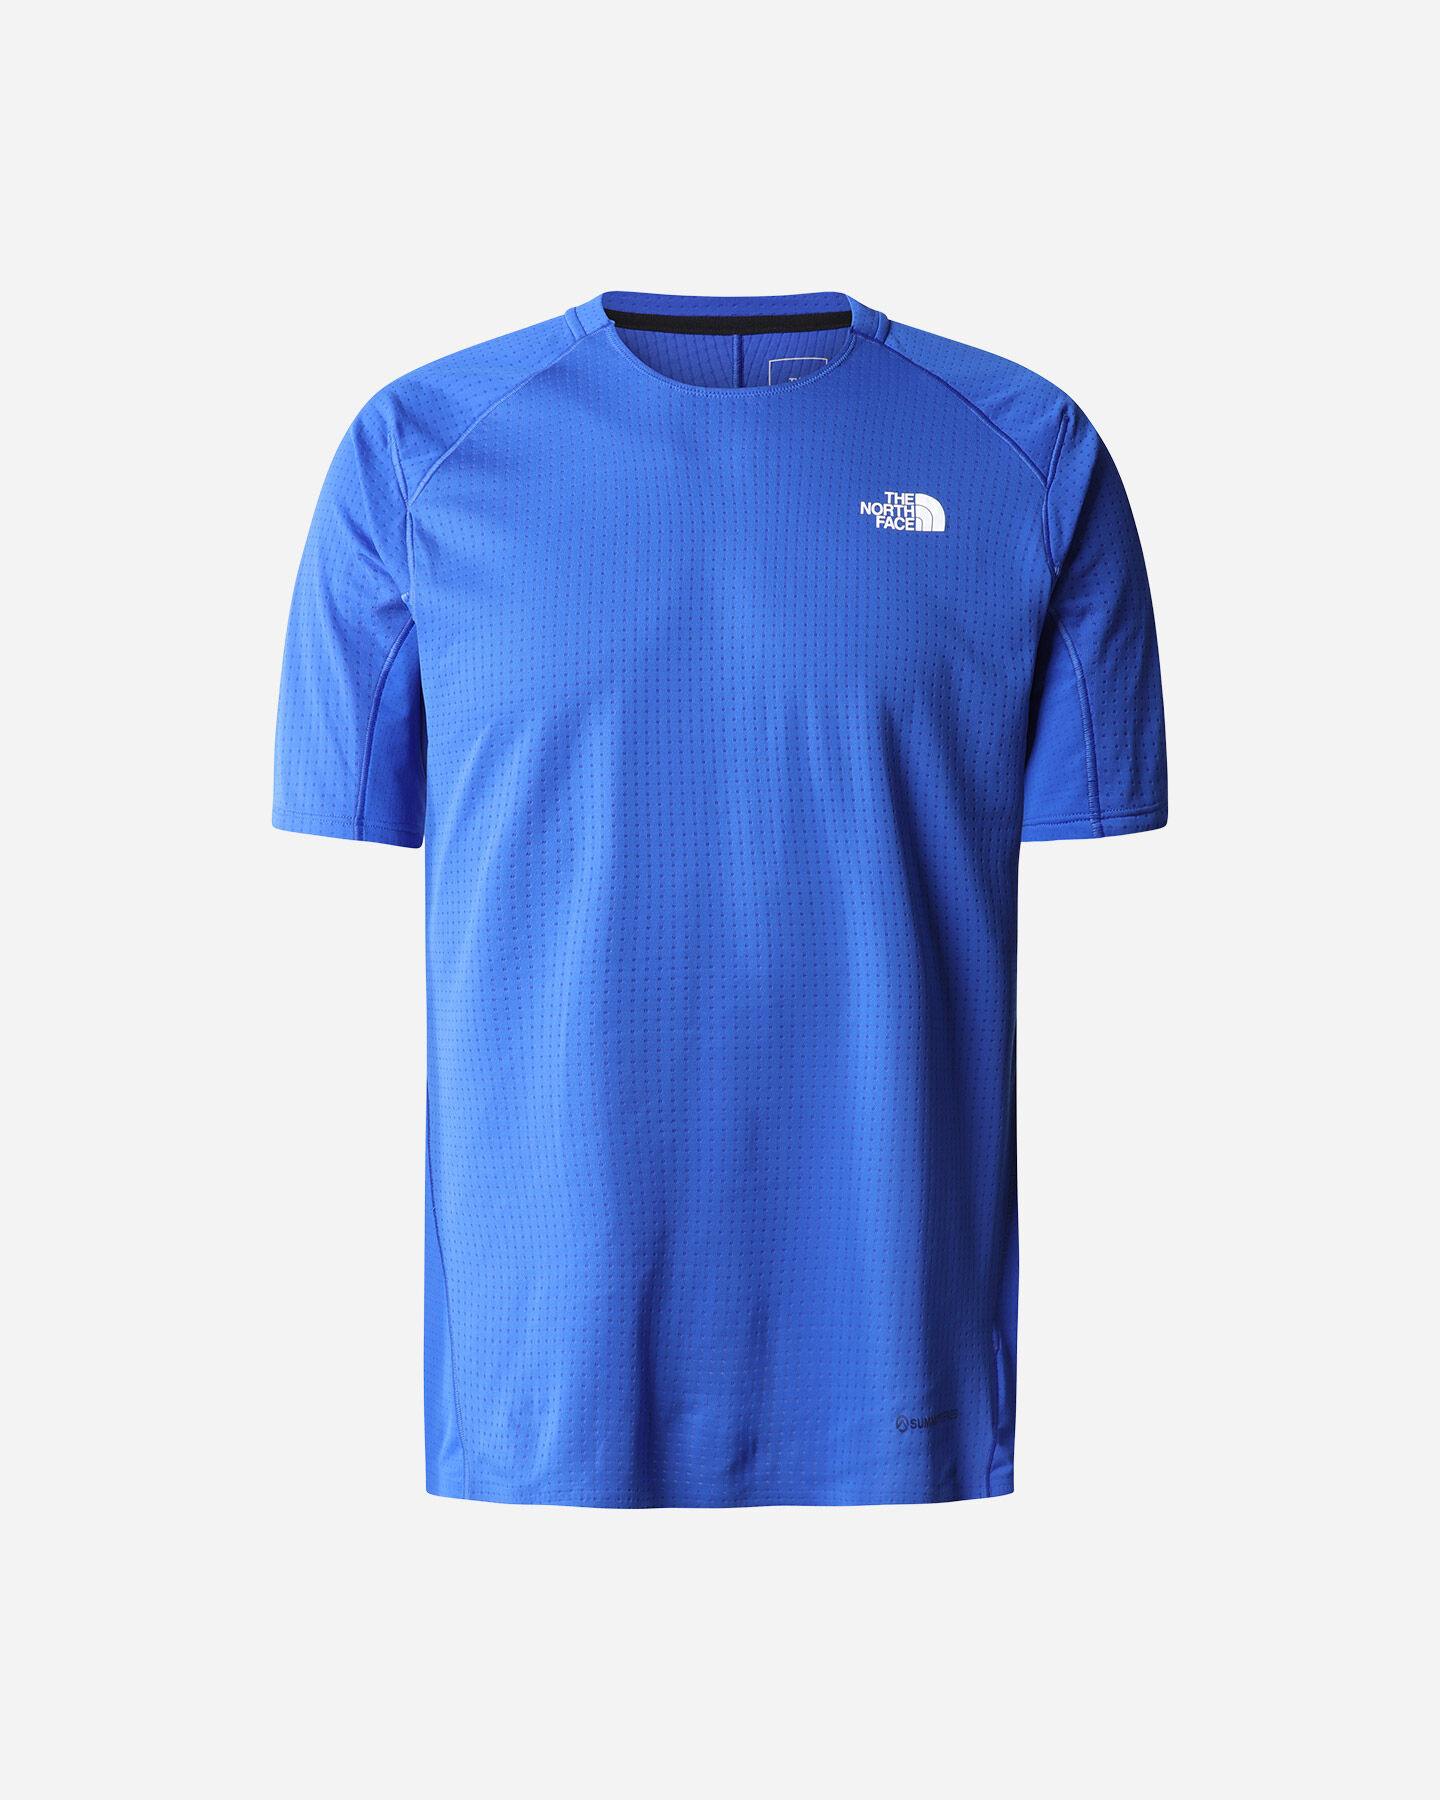  T-Shirt THE NORTH FACE SUMMIT CREVASSE M S5536409|CZ6|S scatto 0